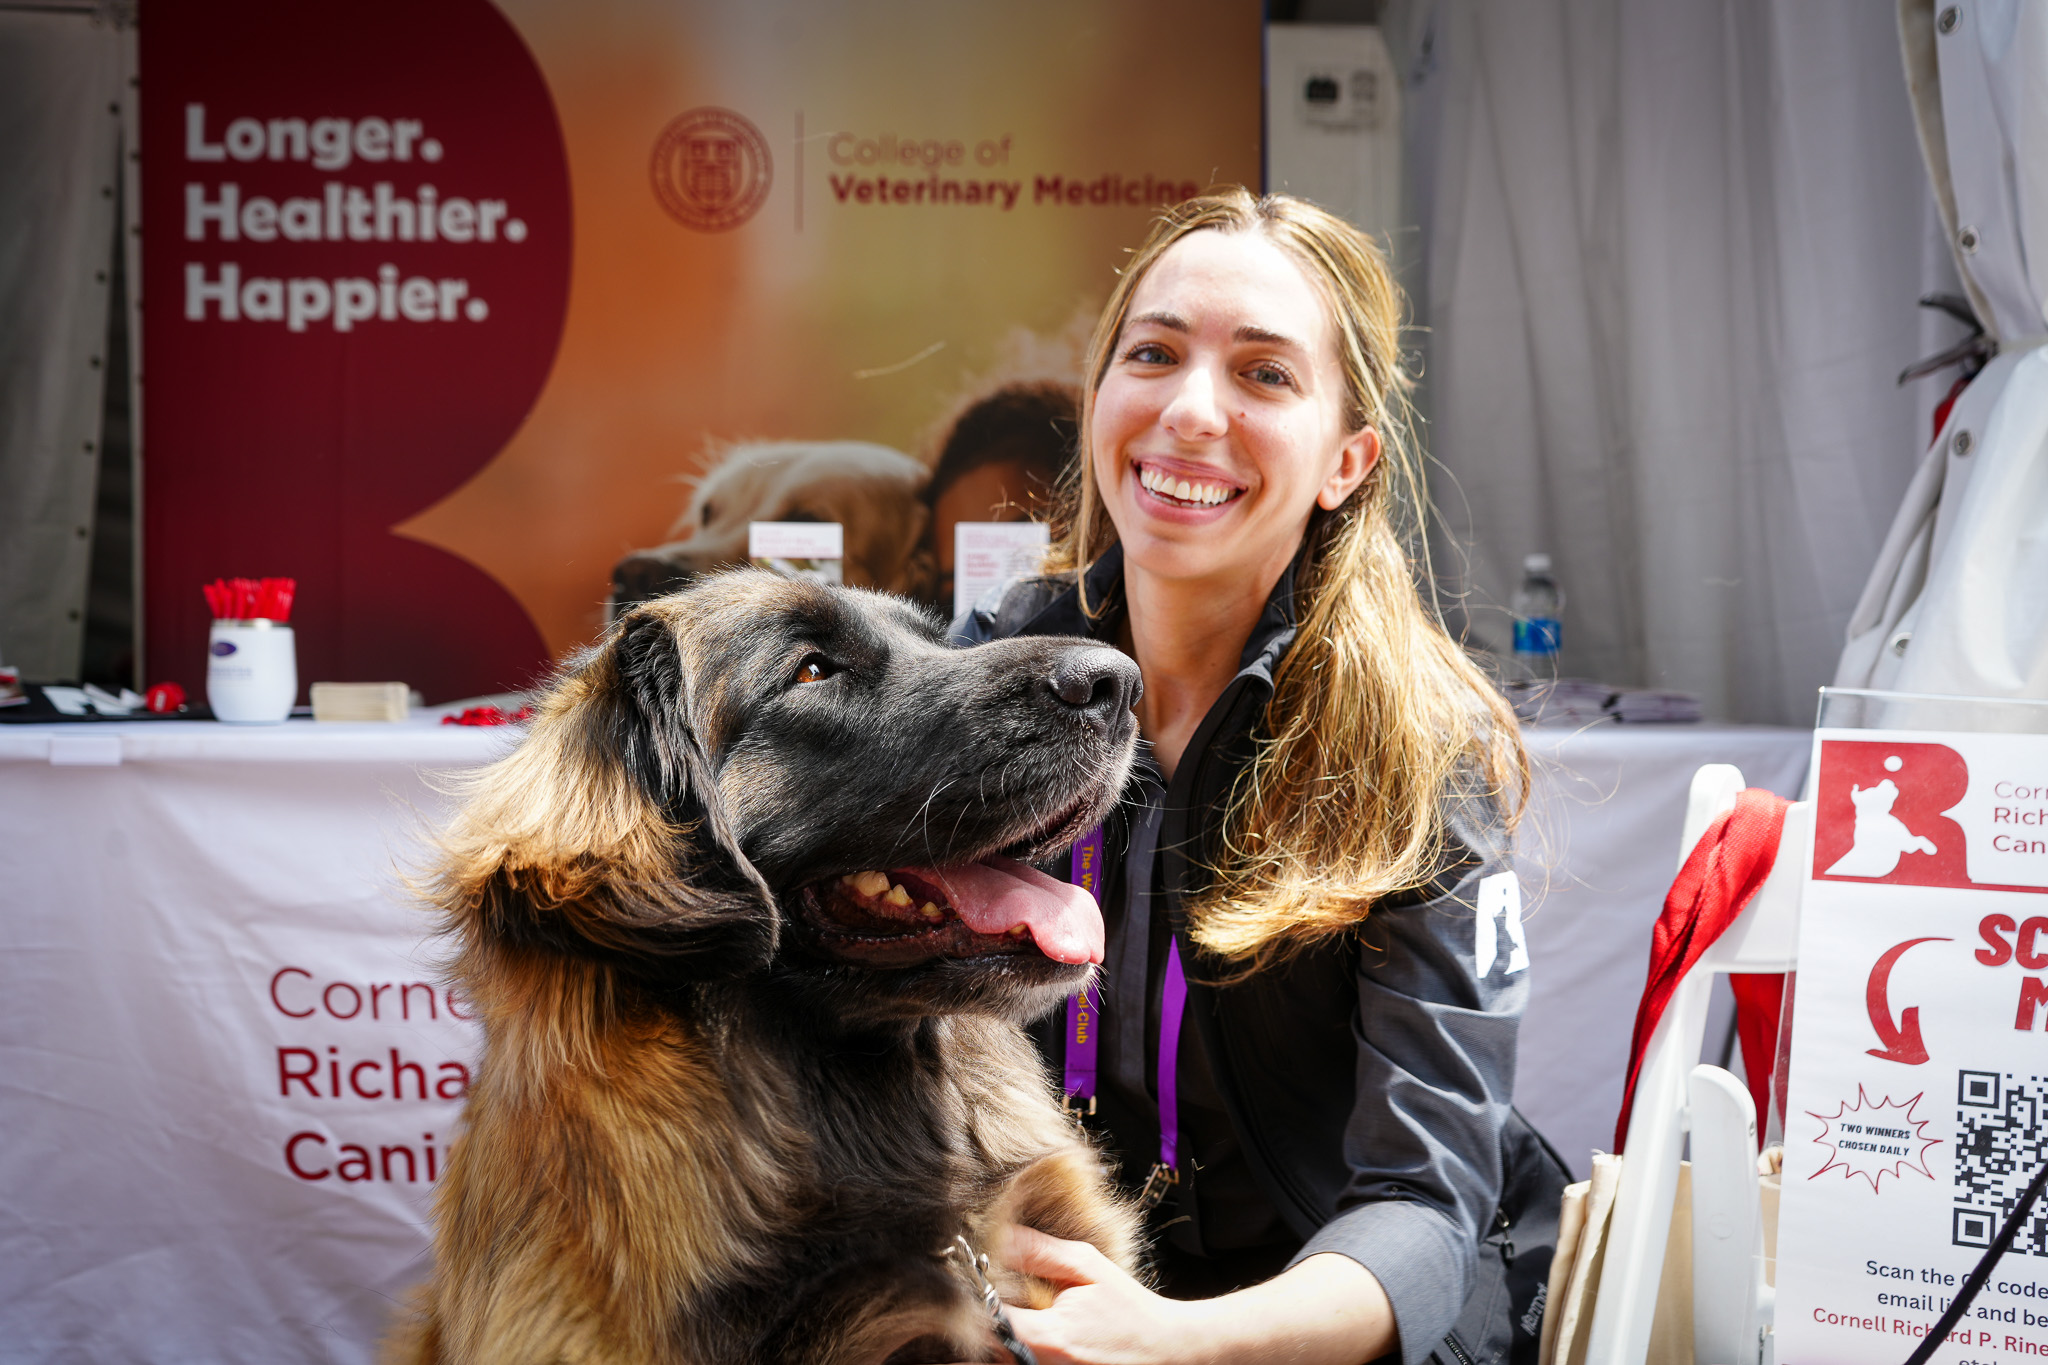 Dr. Aly Cohen kneels next to a giant dog sitting in front of a CVM booth